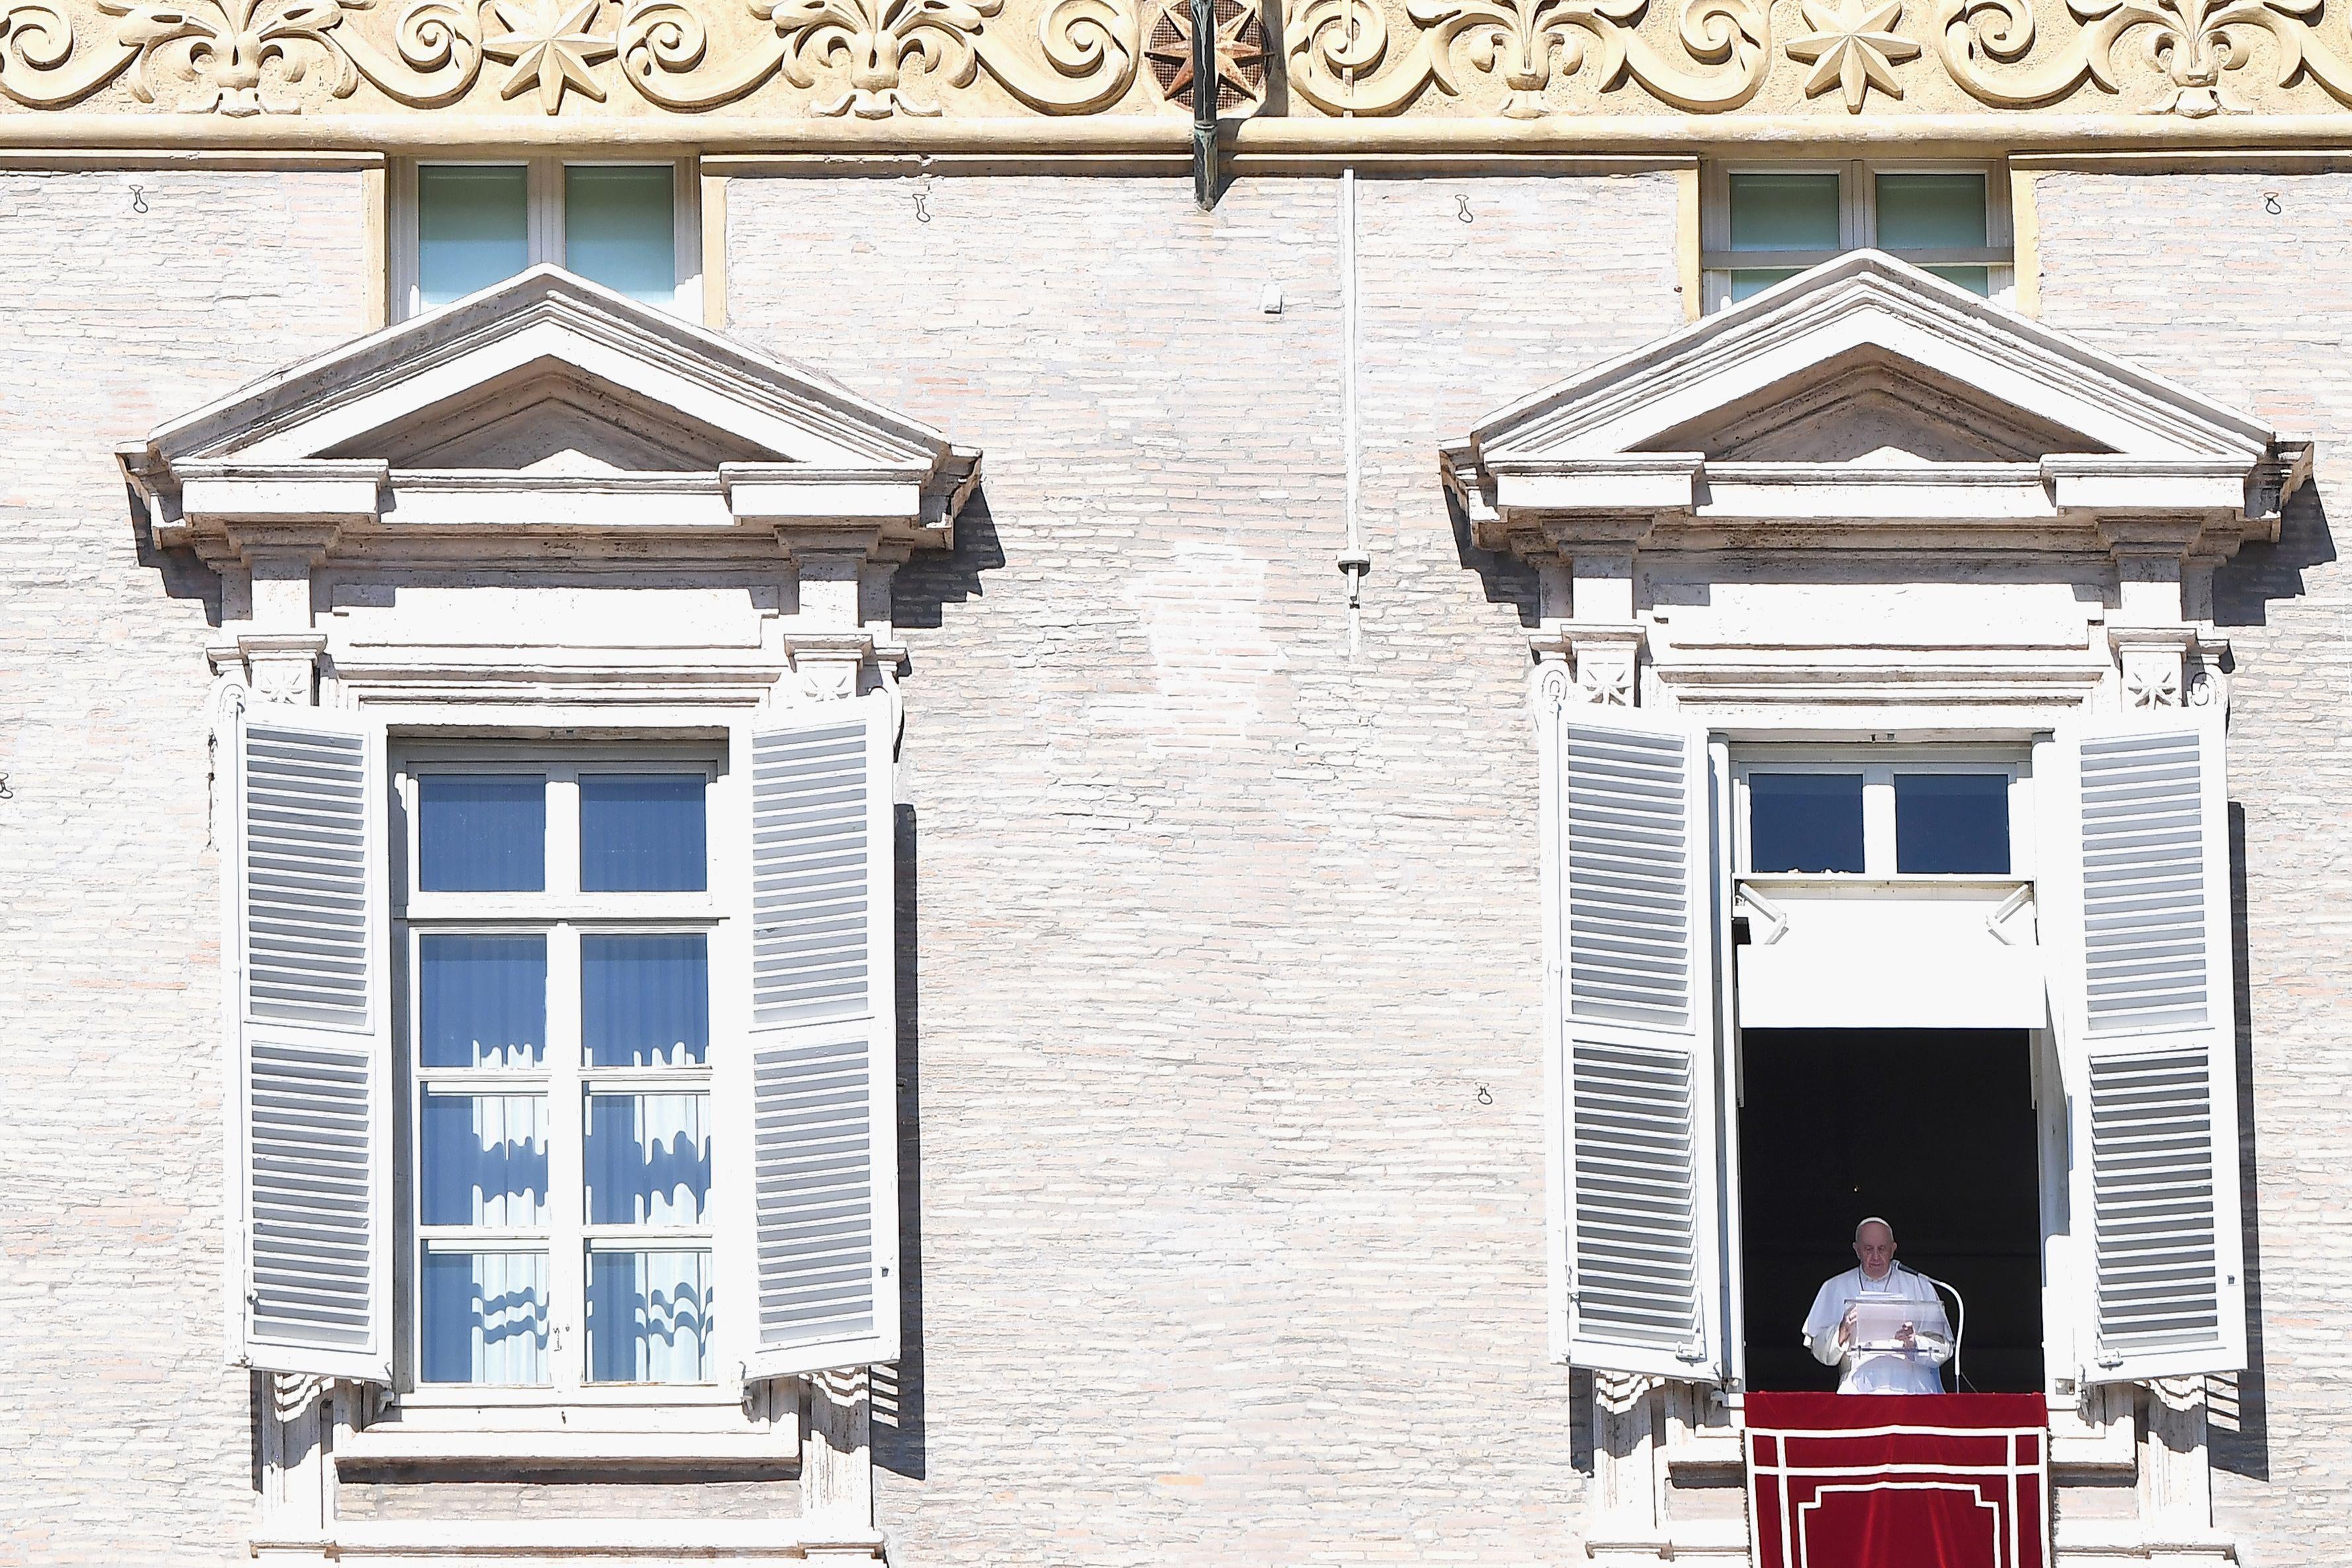 Pope Francis speaks at a lectern from a window overlooking St. Peter’s Square